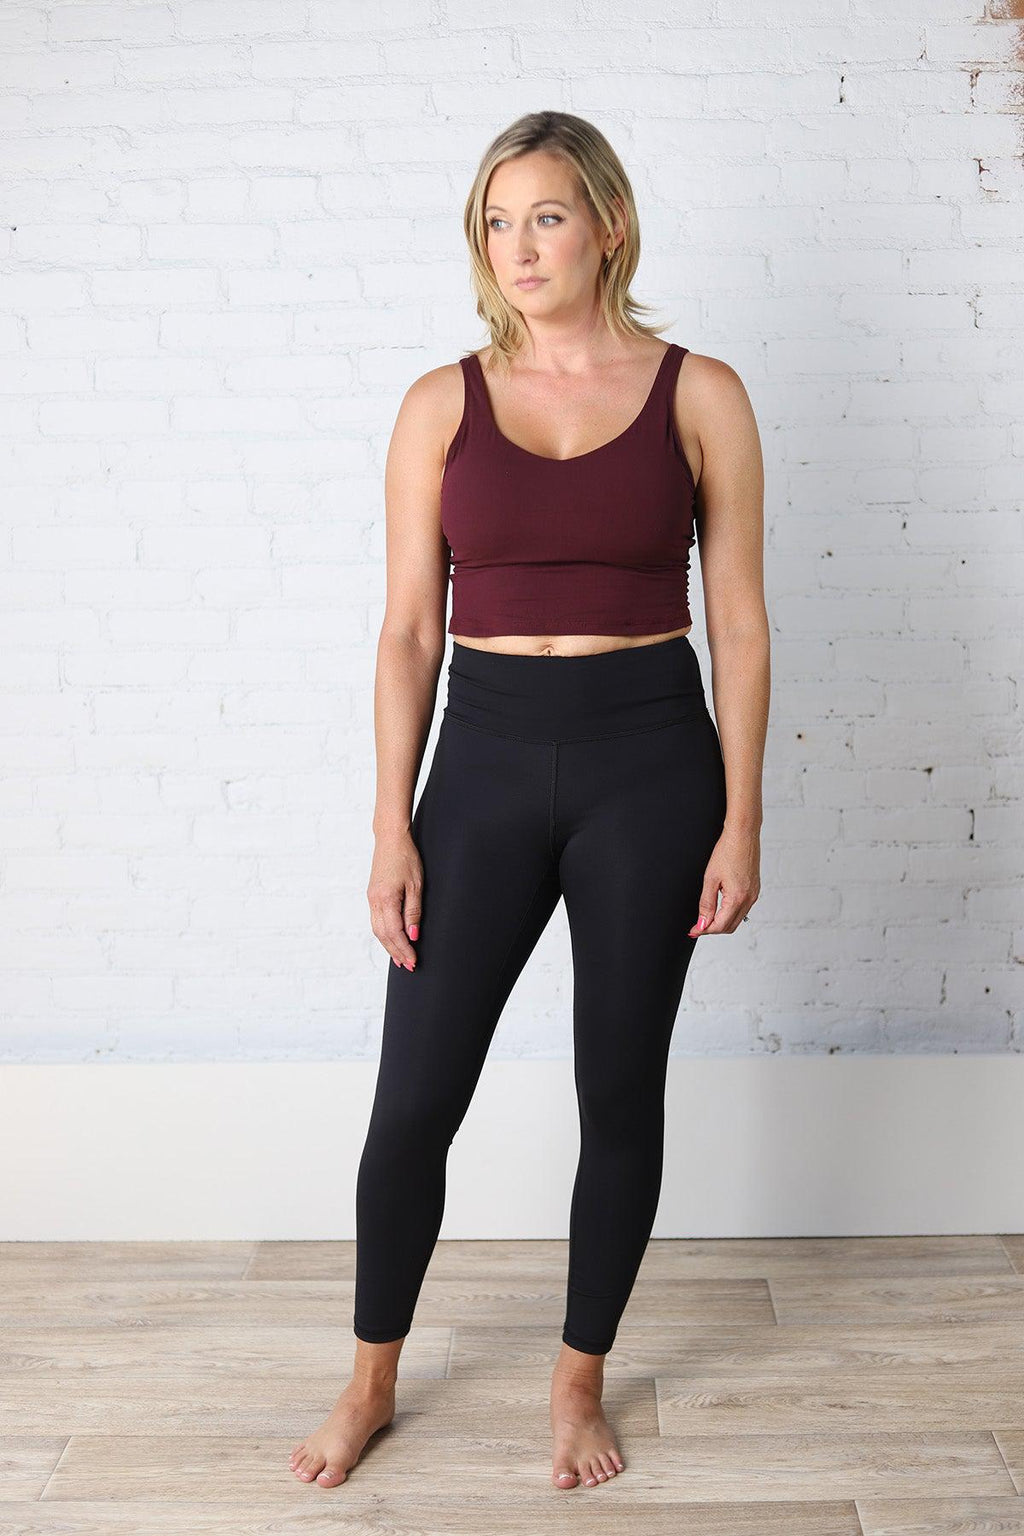 Maeve Butter Yoga Pants with Side Pockets – Gallery 512 Boutique